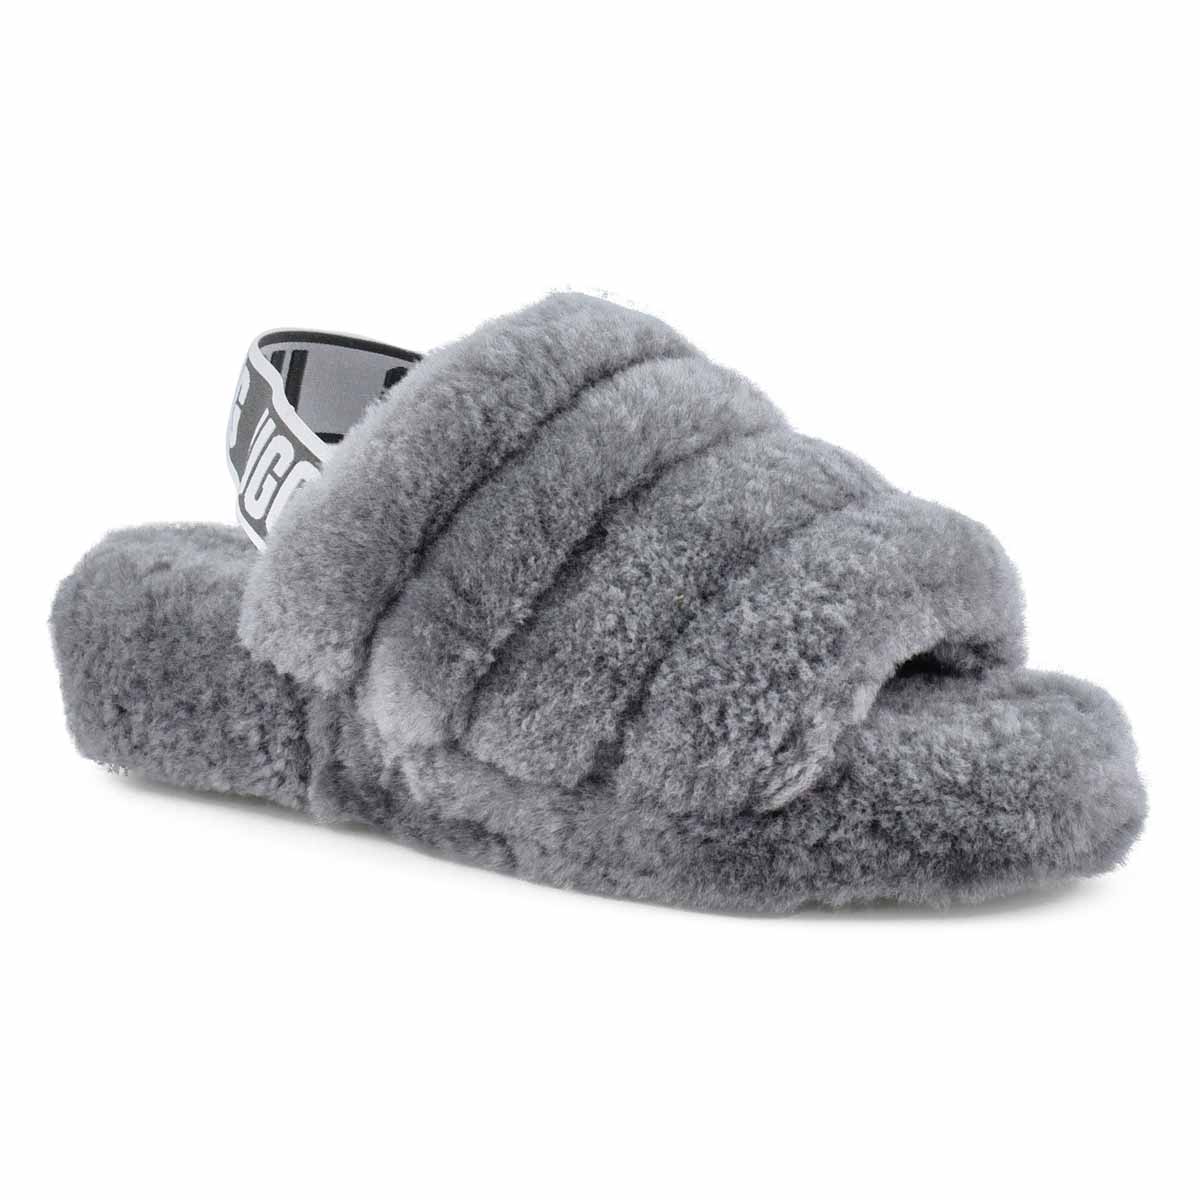 ugg slippers black and white